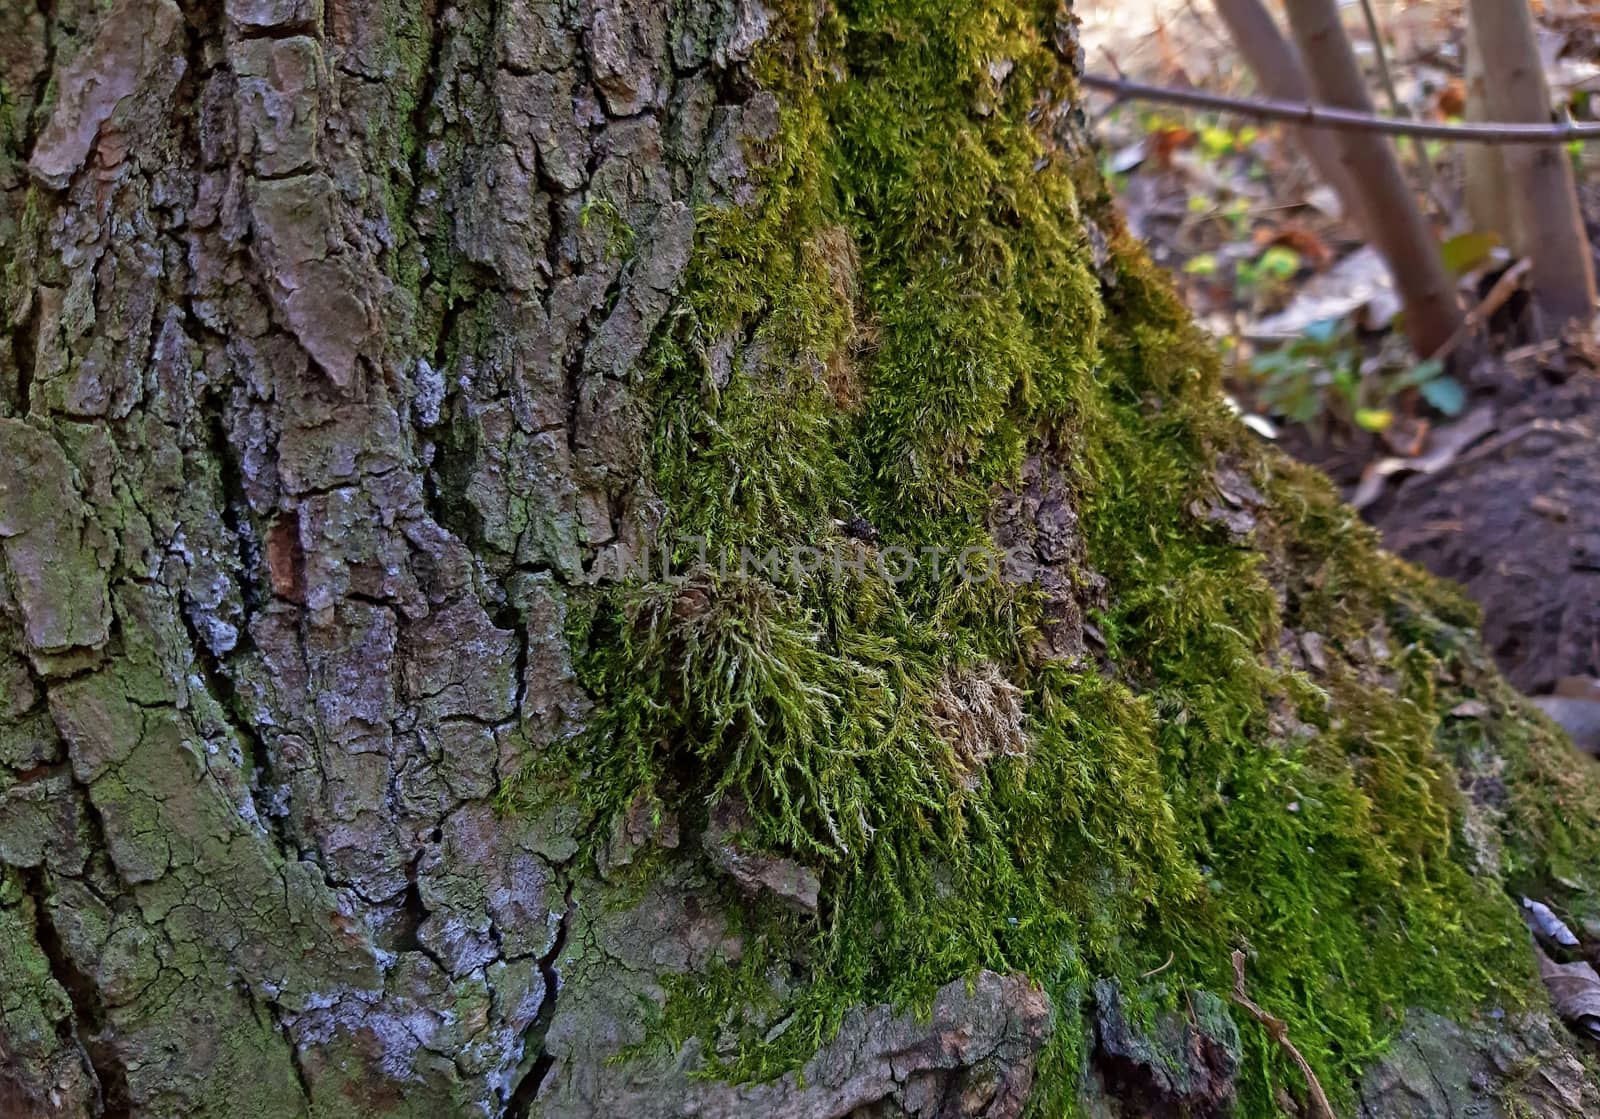 Moss growing on tree bark in the forest by Mindru